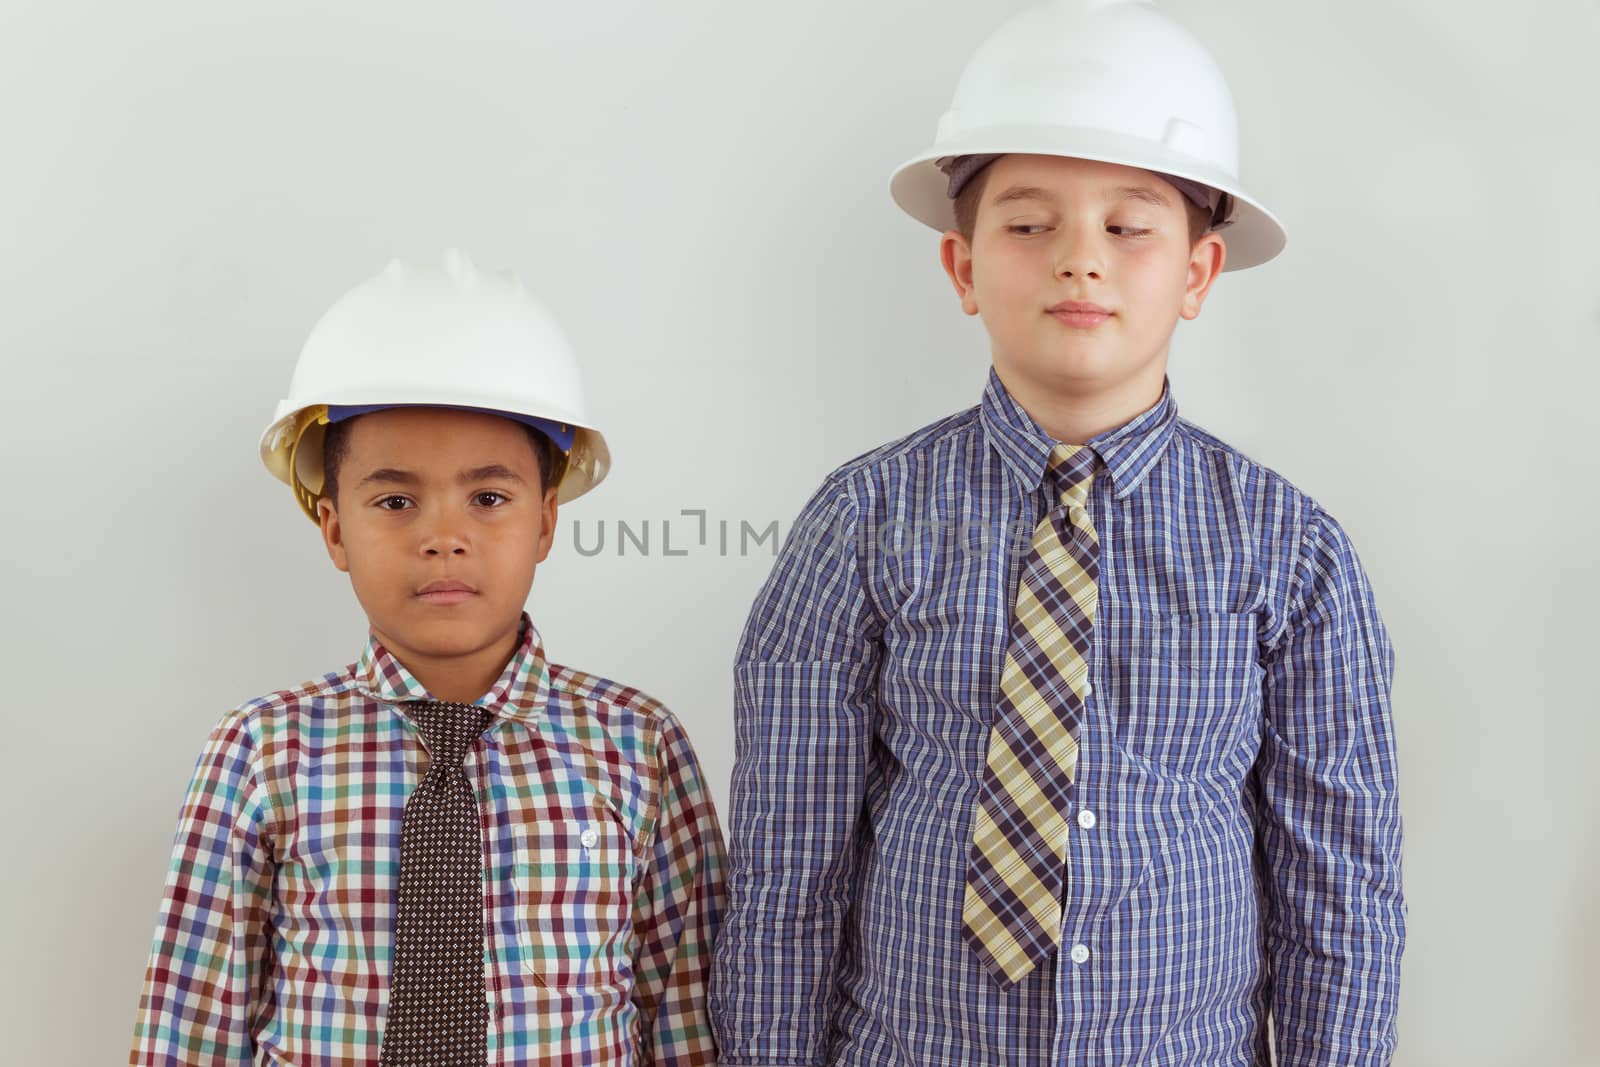 Two multiracial young aspiring tween engineers dressed in ties and hardhats standing side by side against a wall as the two friends anticipate their future careers